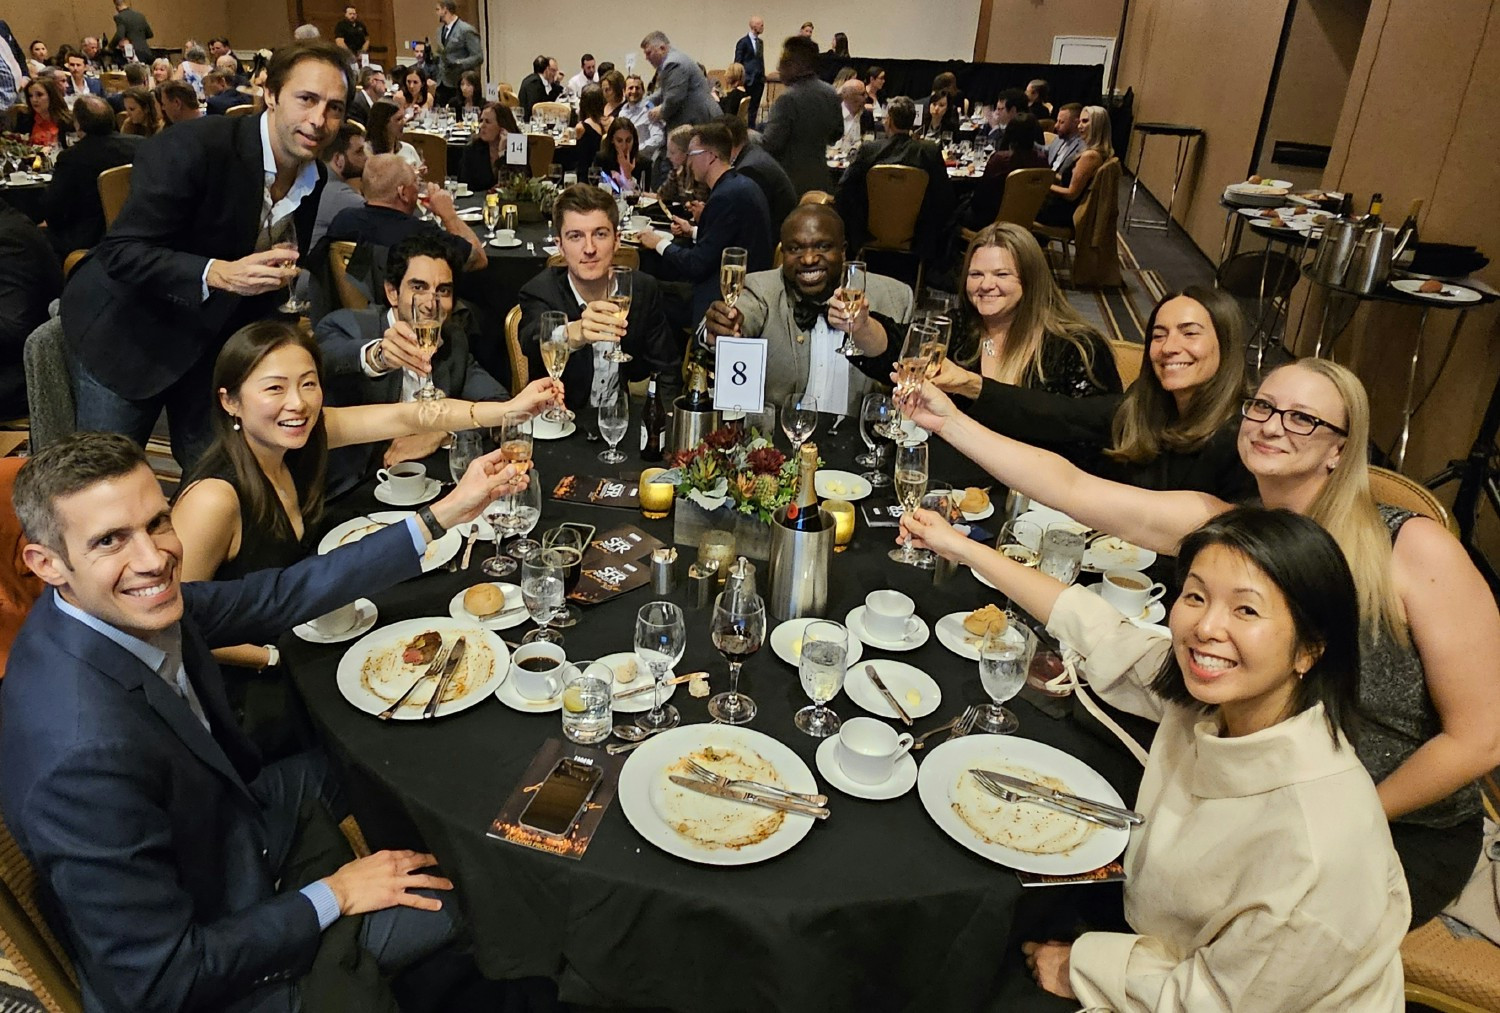 Celebrating joy & achievement: Lafayette, Brandywine Homes, and Marquis toast their double victory at the IMN SFR award